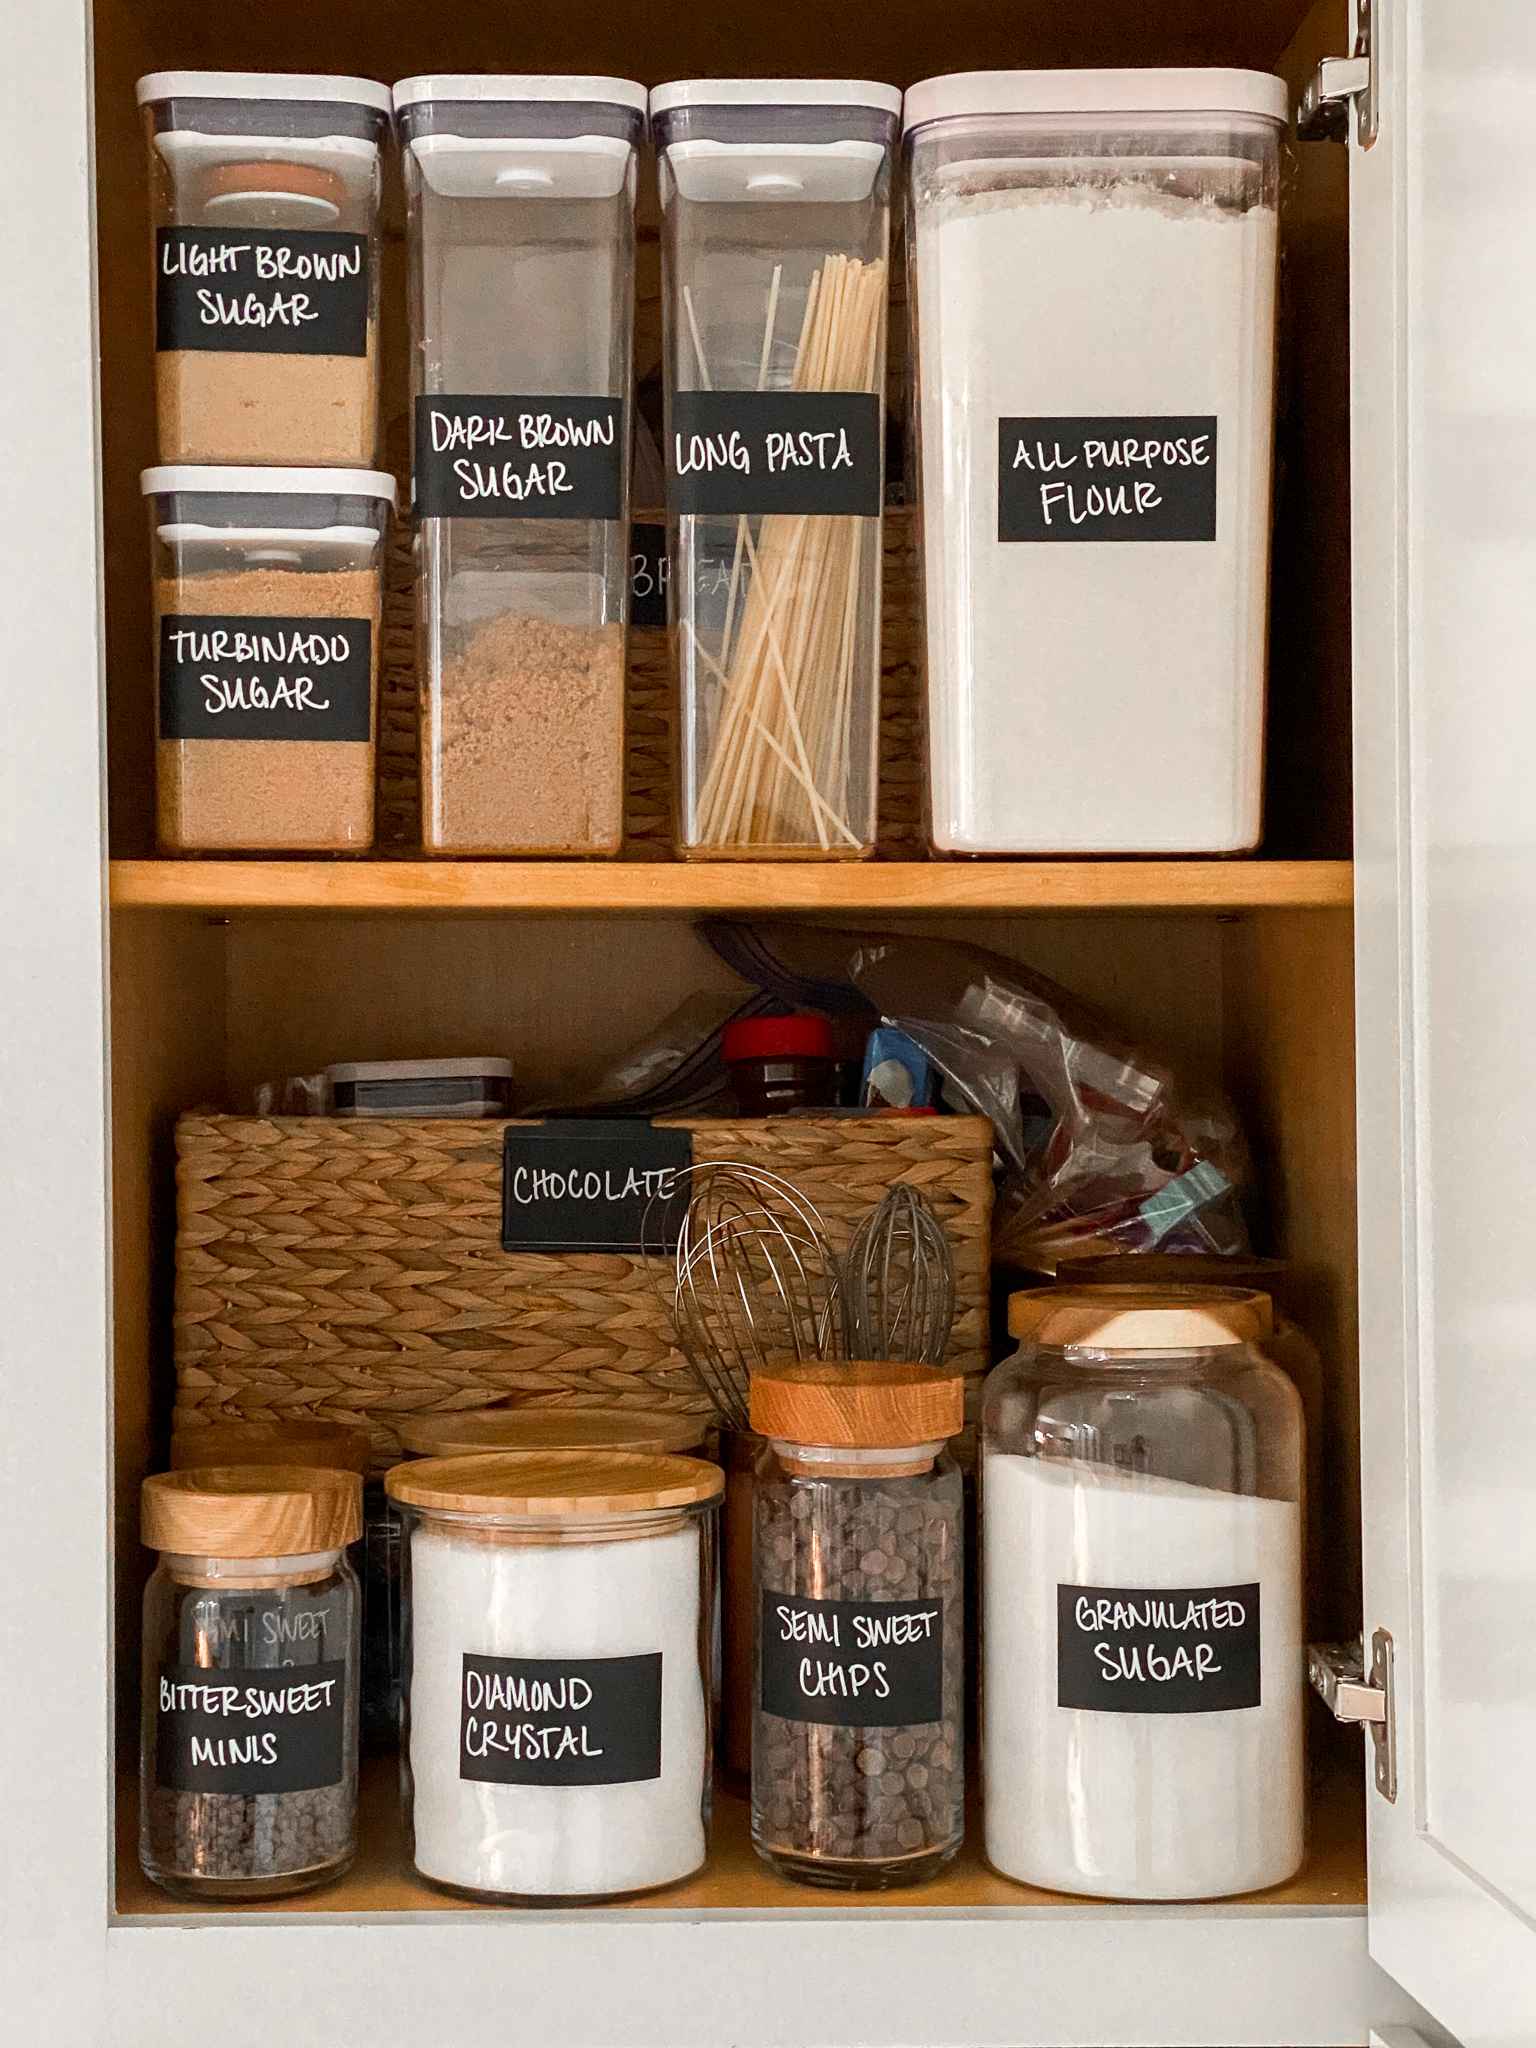 Any ideas on how to organize this very deep pantry? Just moved in